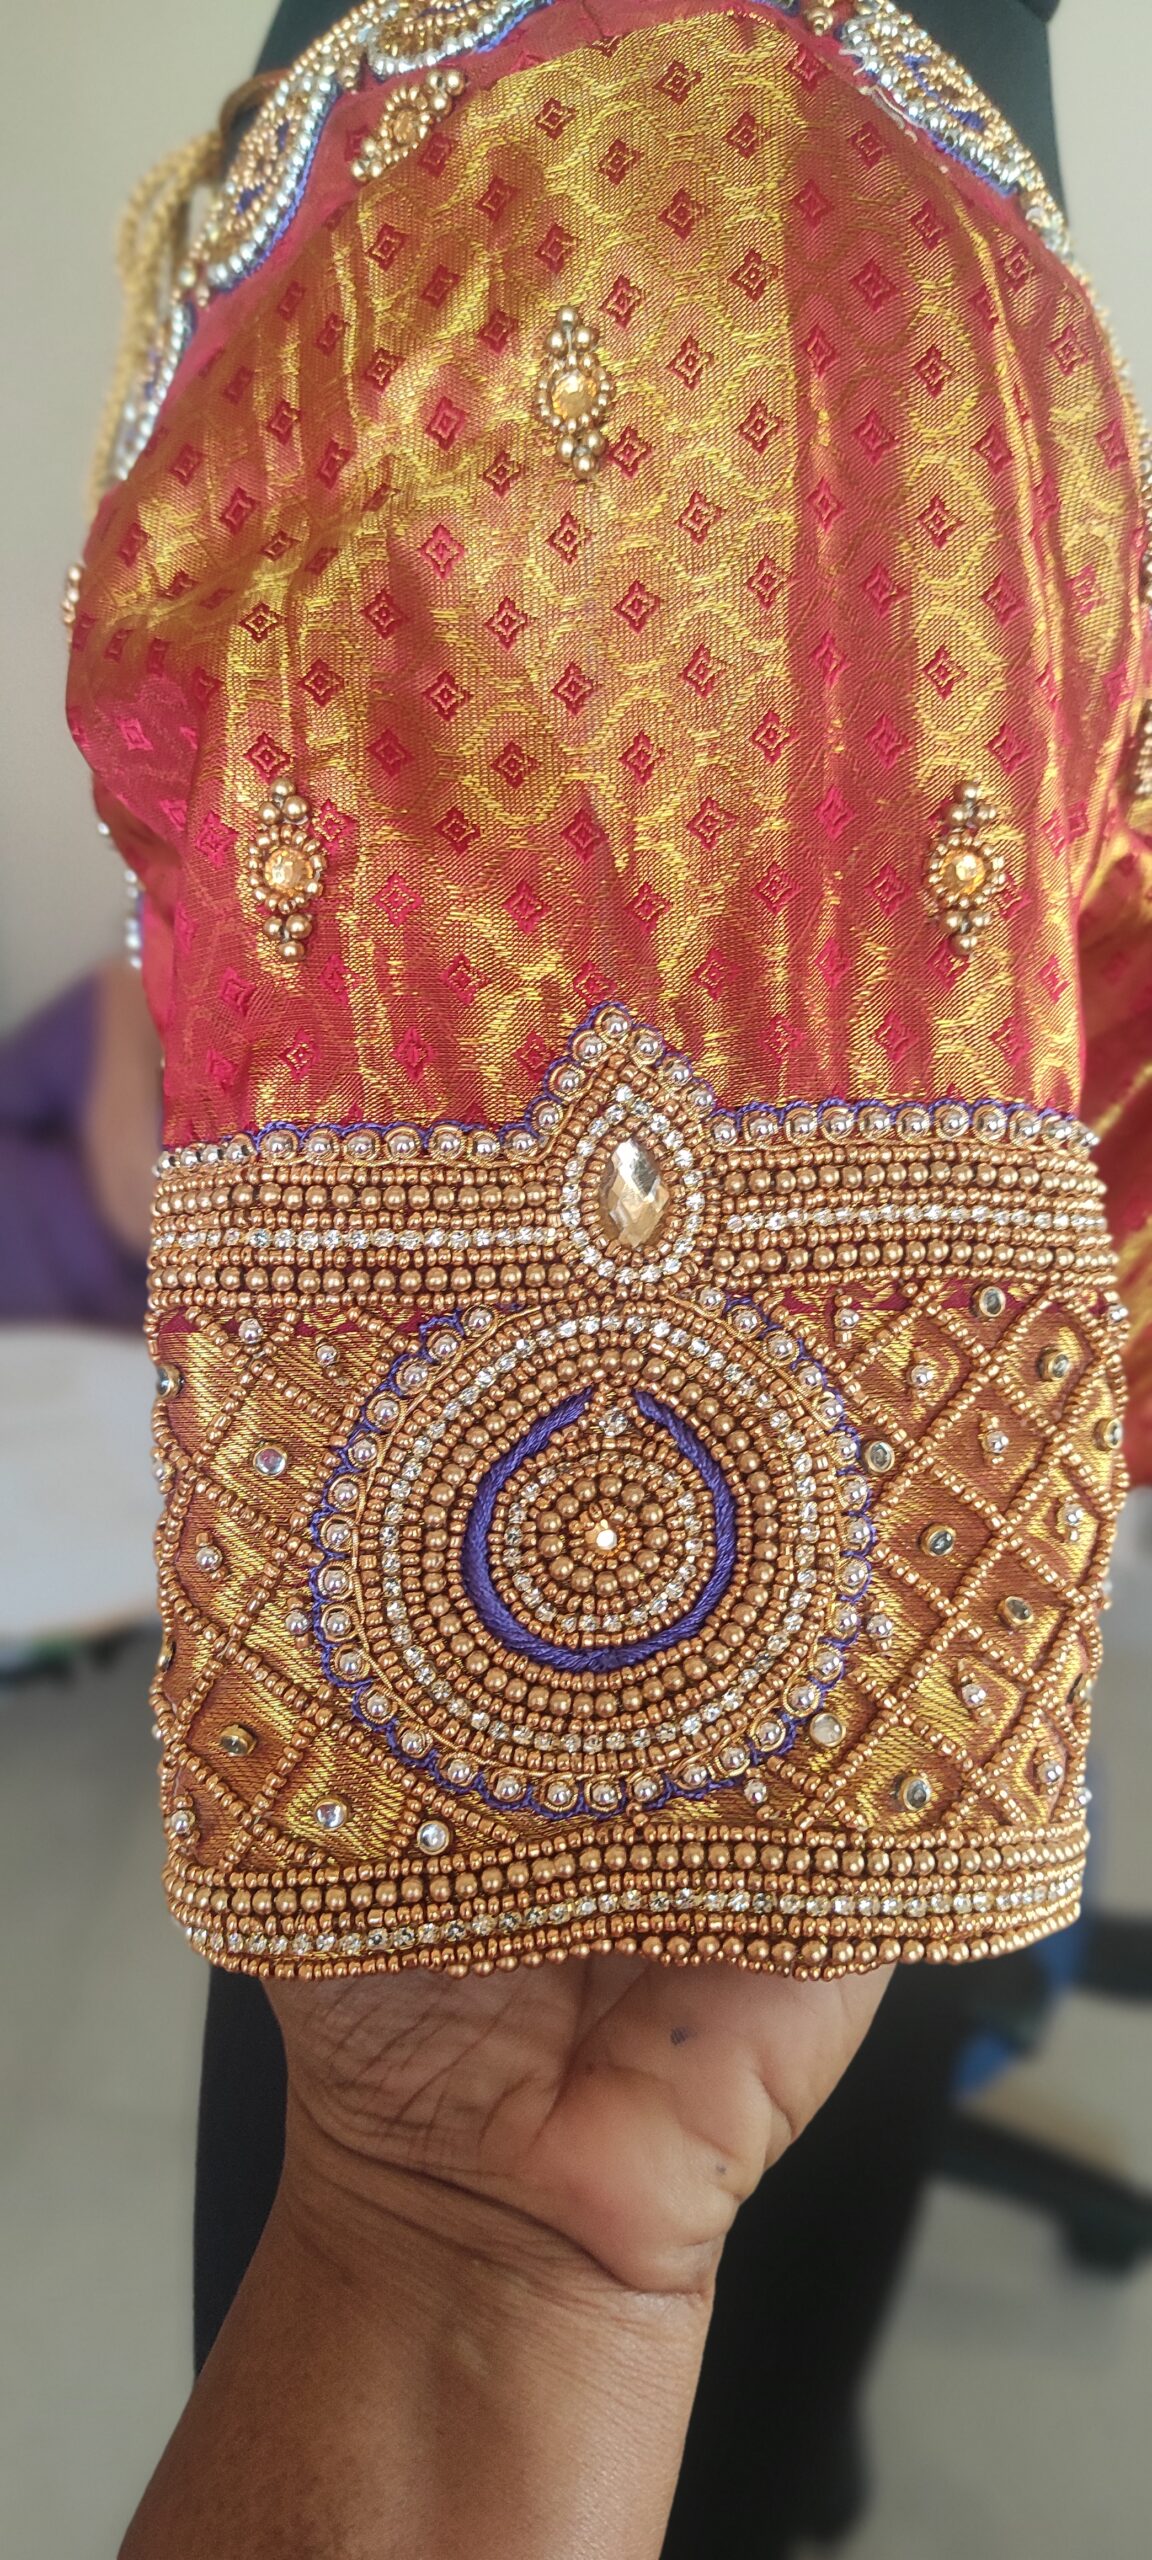 Aari embroidery classes in Chennai: create stunning Expert Embroidery designs